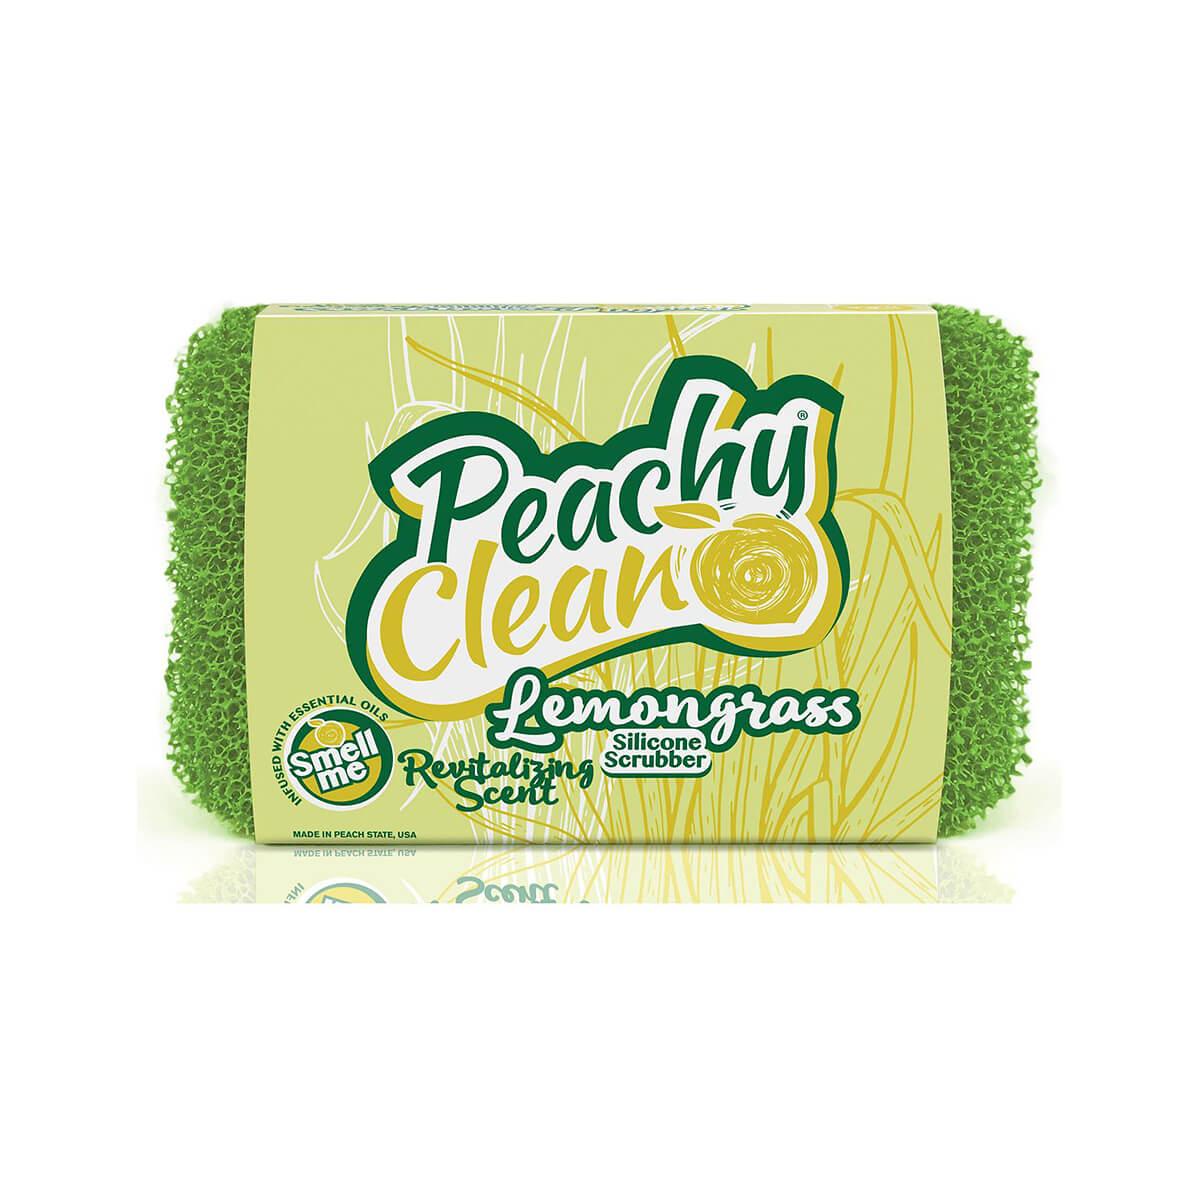 Peachy Clean Silicone Scrubbers, 3 count 